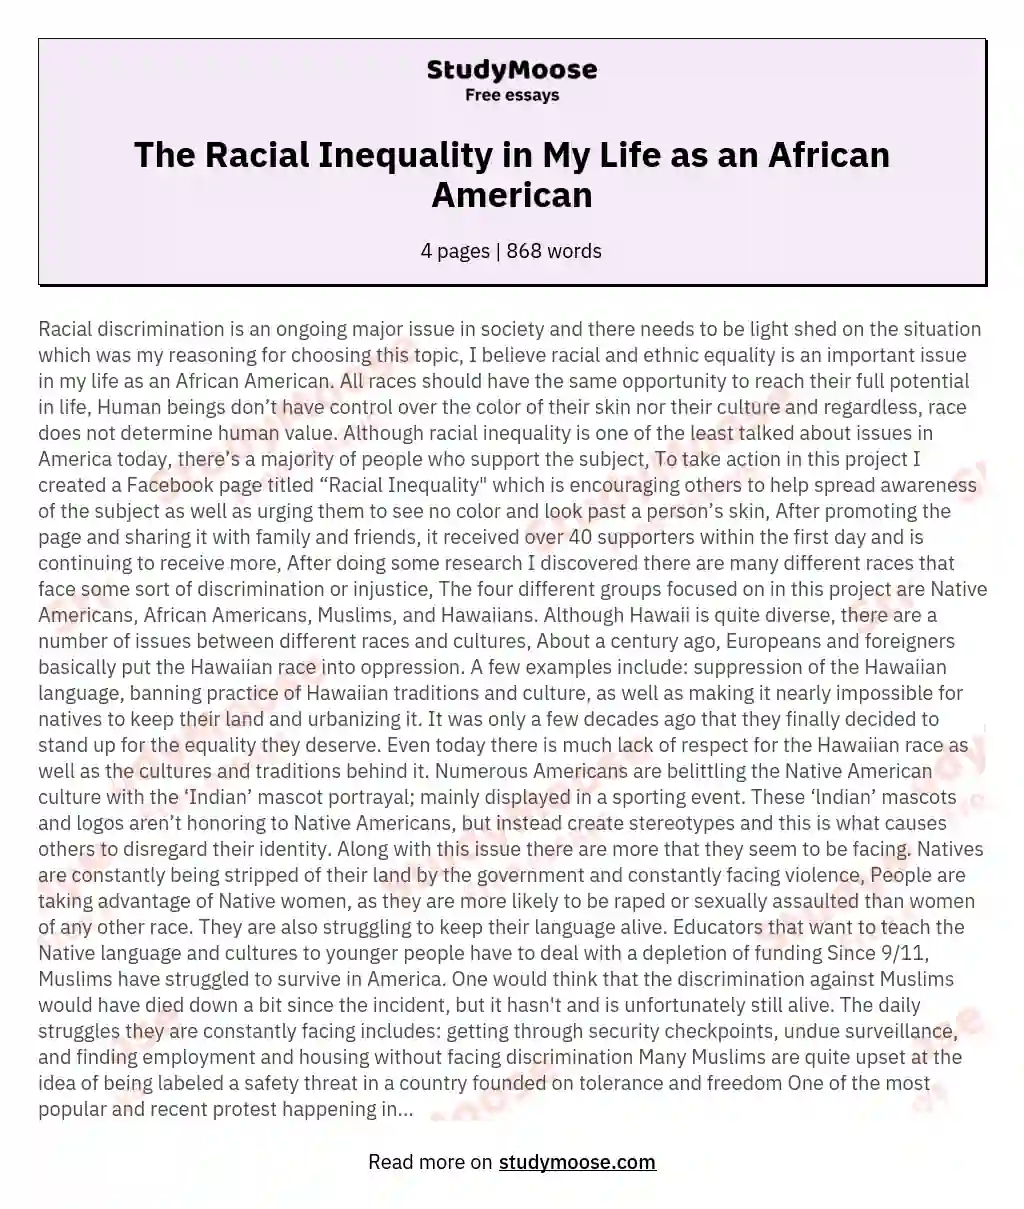 The Racial Inequality in My Life as an African American essay